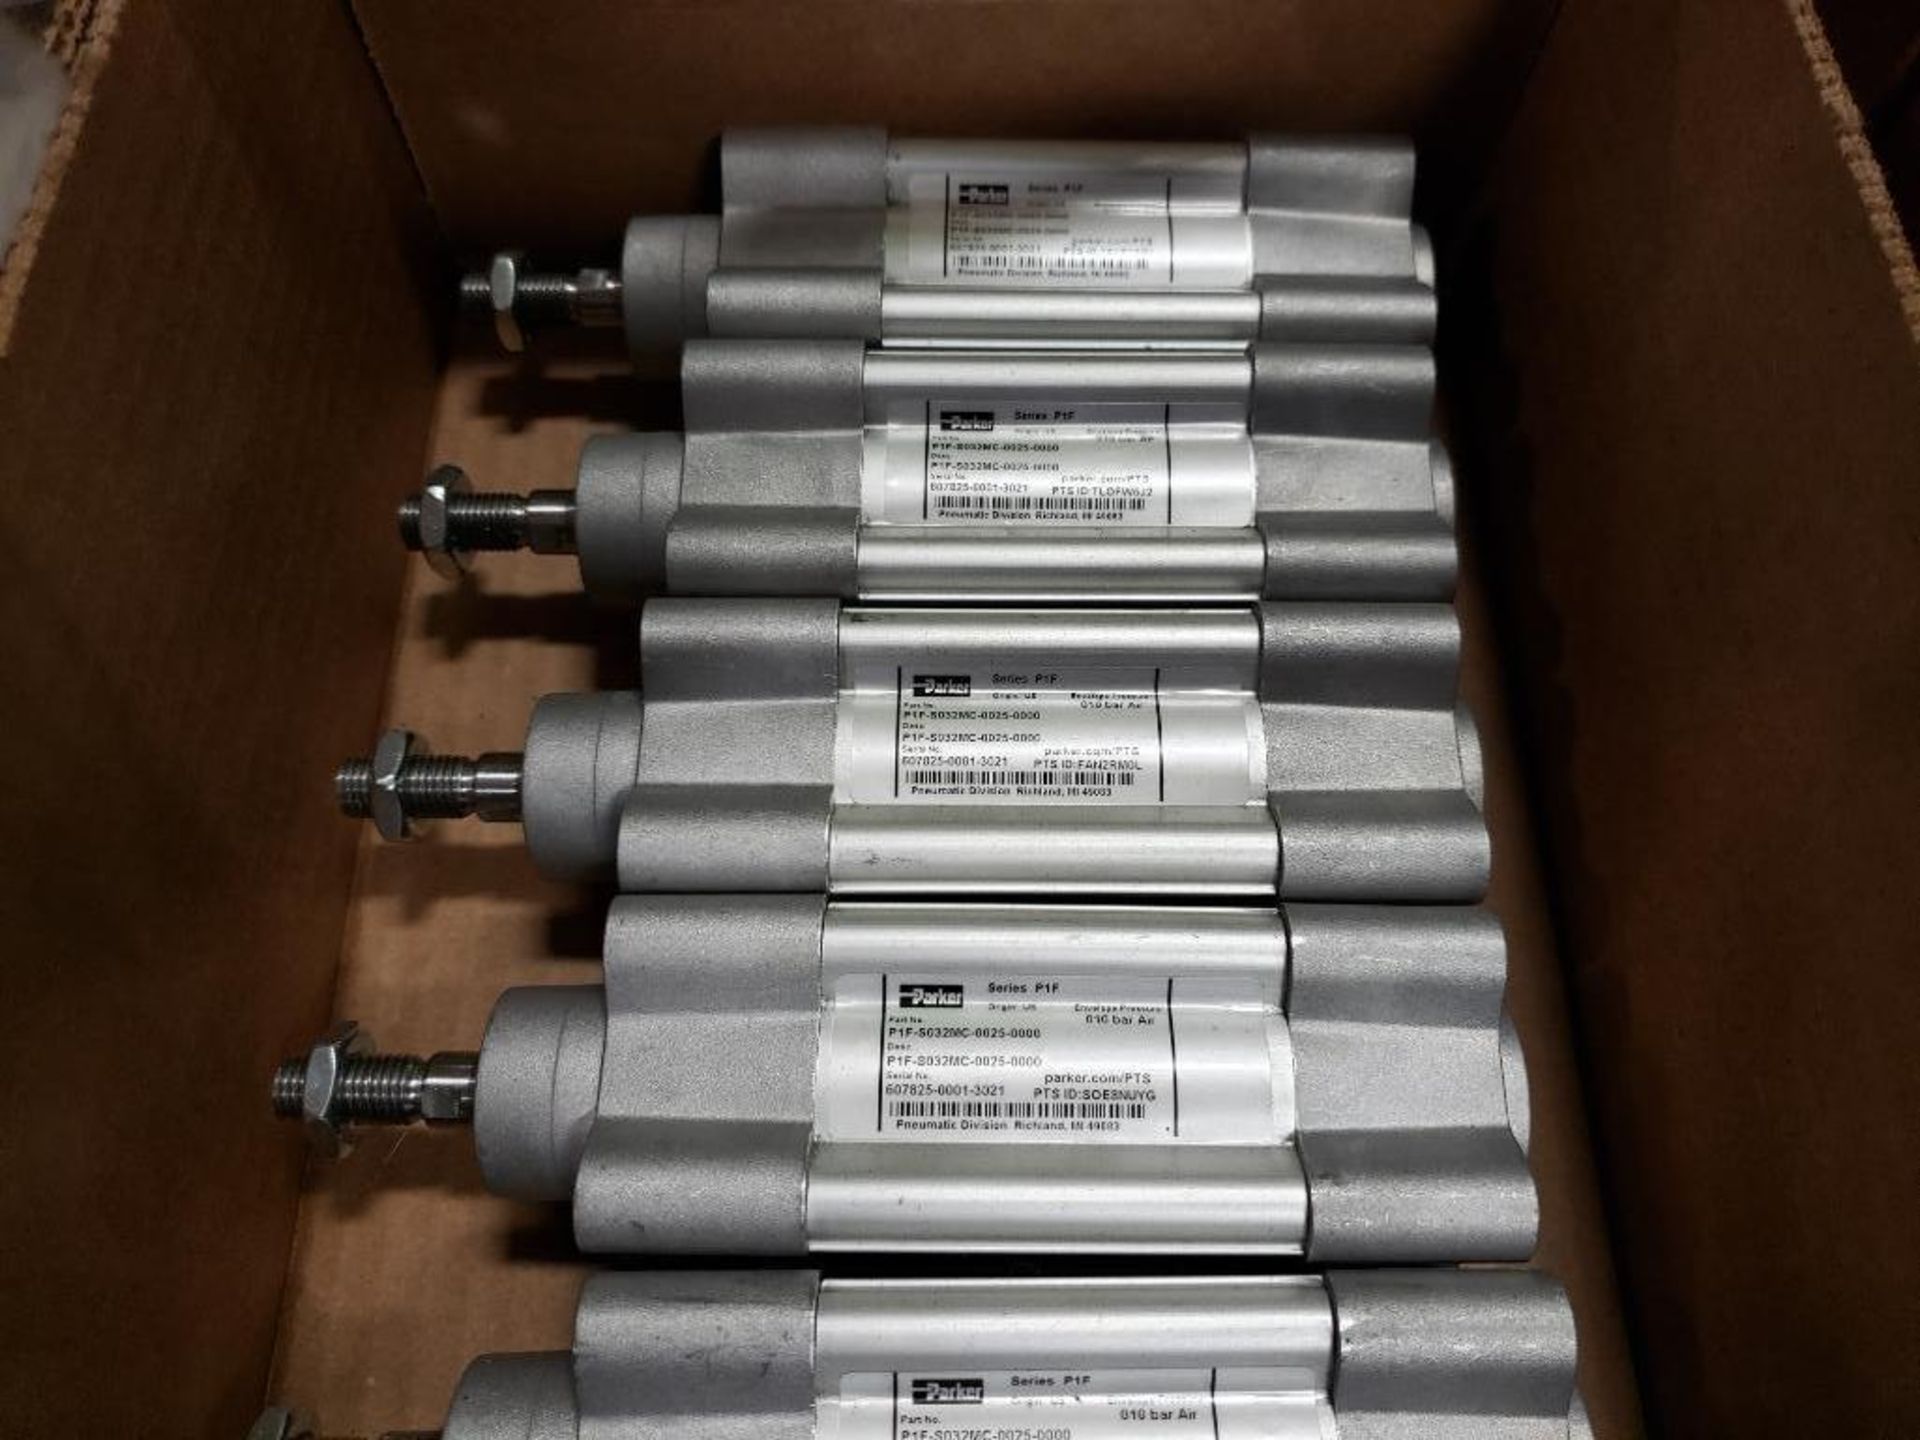 Qty 6 - Parker P1F-S032MC-0025-0000 pneumatic cylinder. - Image 3 of 4